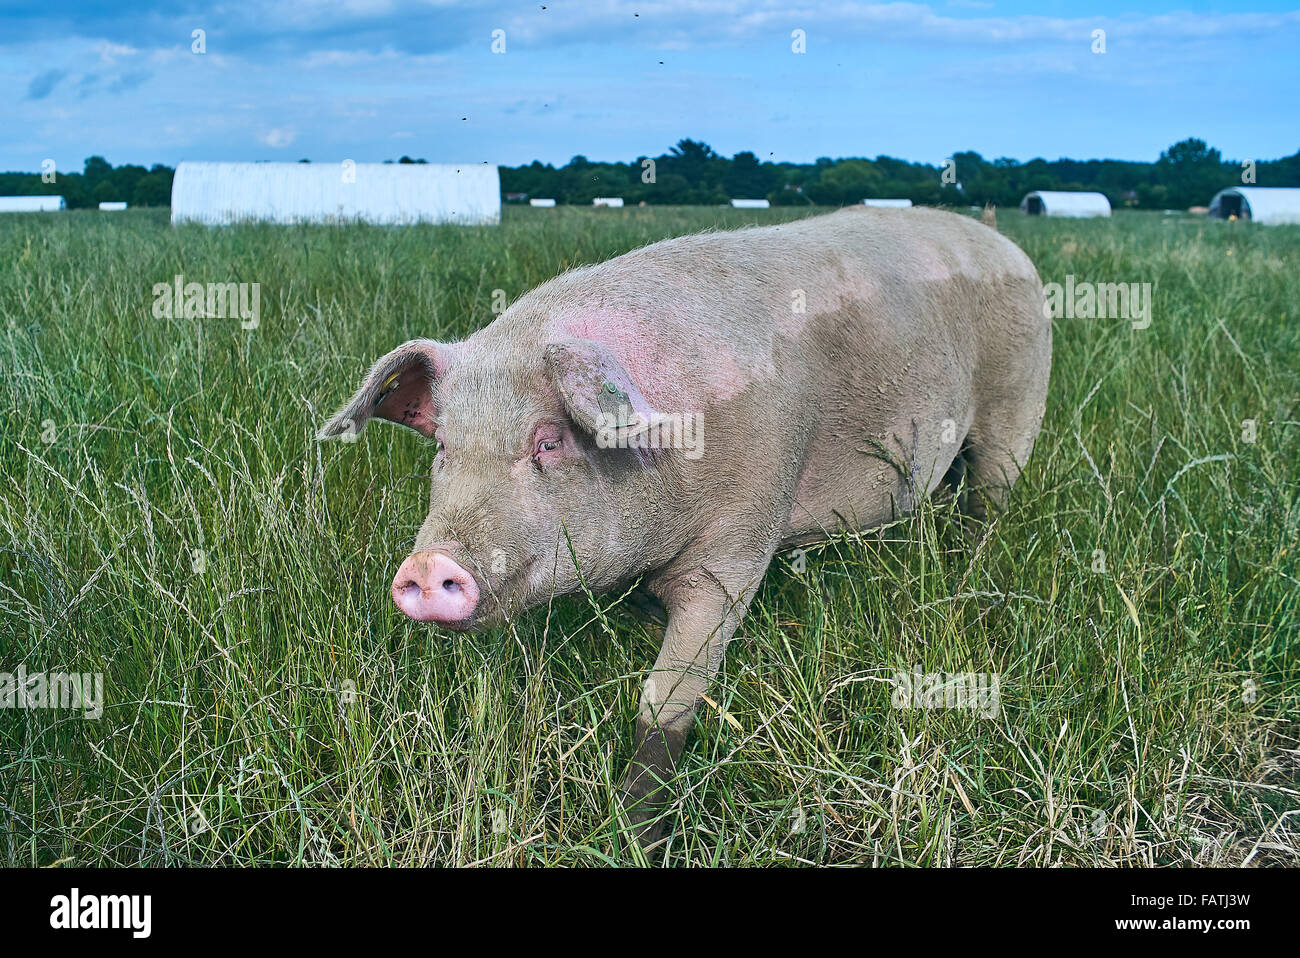 A free range organic pig in a grass field Stock Photo